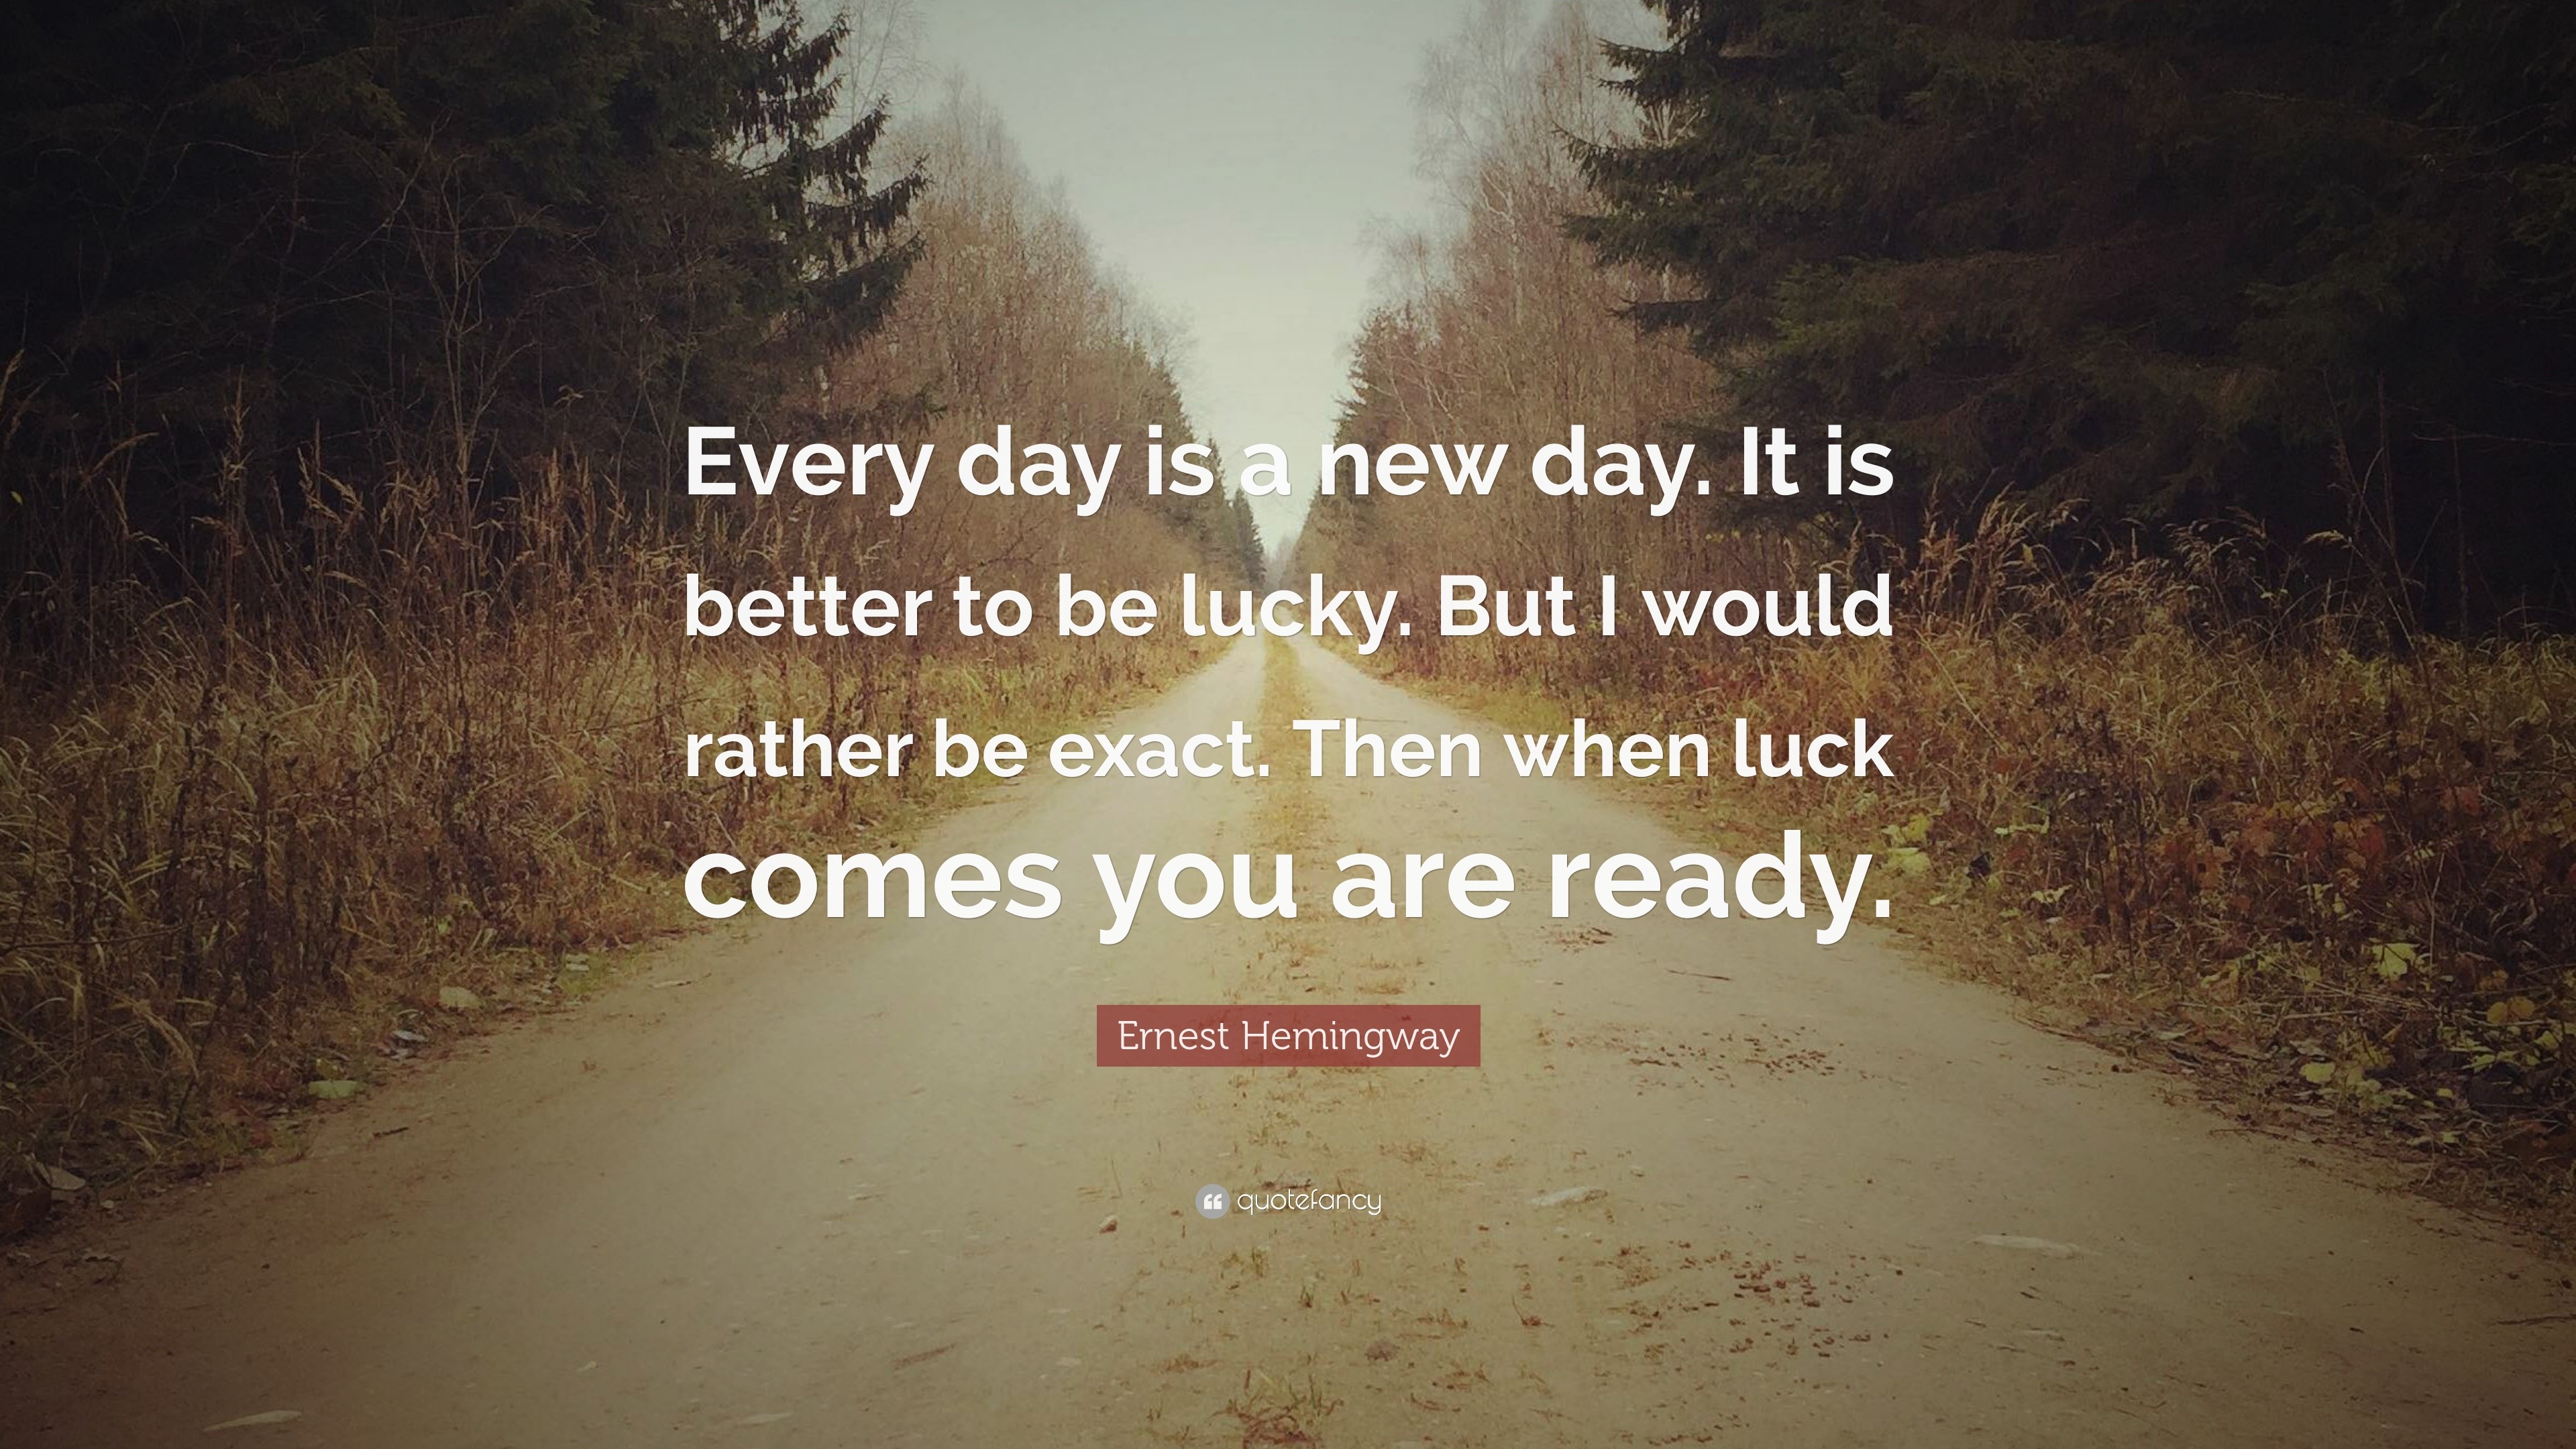 Ernest Hemingway Quote: “Every Day Is A New Day. It Is Better To Be Lucky. But